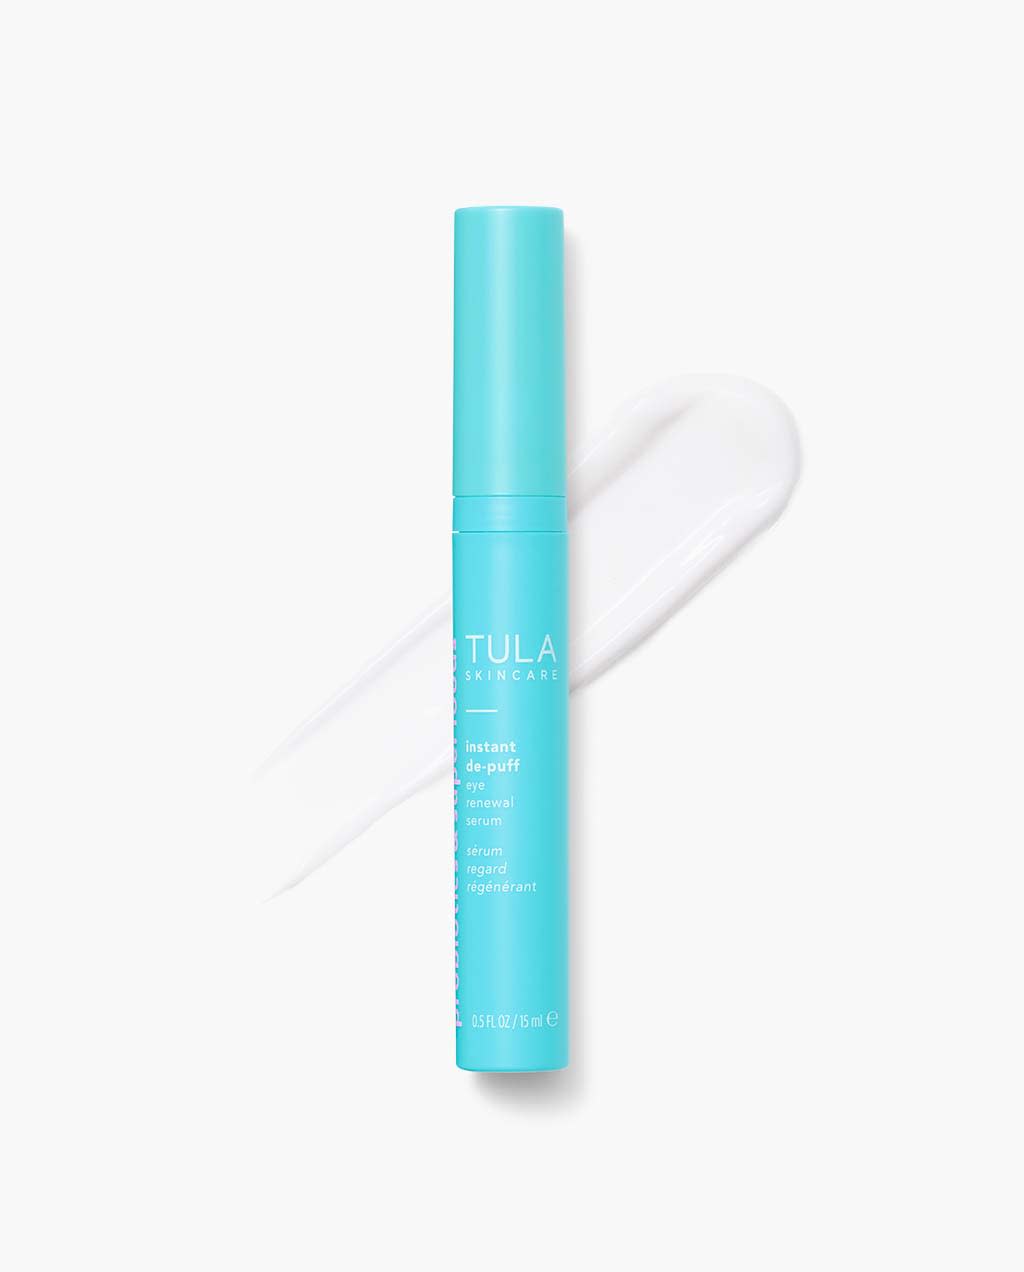 TULA Probiotic Skin Care Instant De-Puff Multi-Spectrum Eye Renewal Serum (Travel-Size) | Dark Circles Under Eye Treatment, Contains Caffeine to Reduce Puffiness and Signs of Wrinkles | 0.25 fl oz